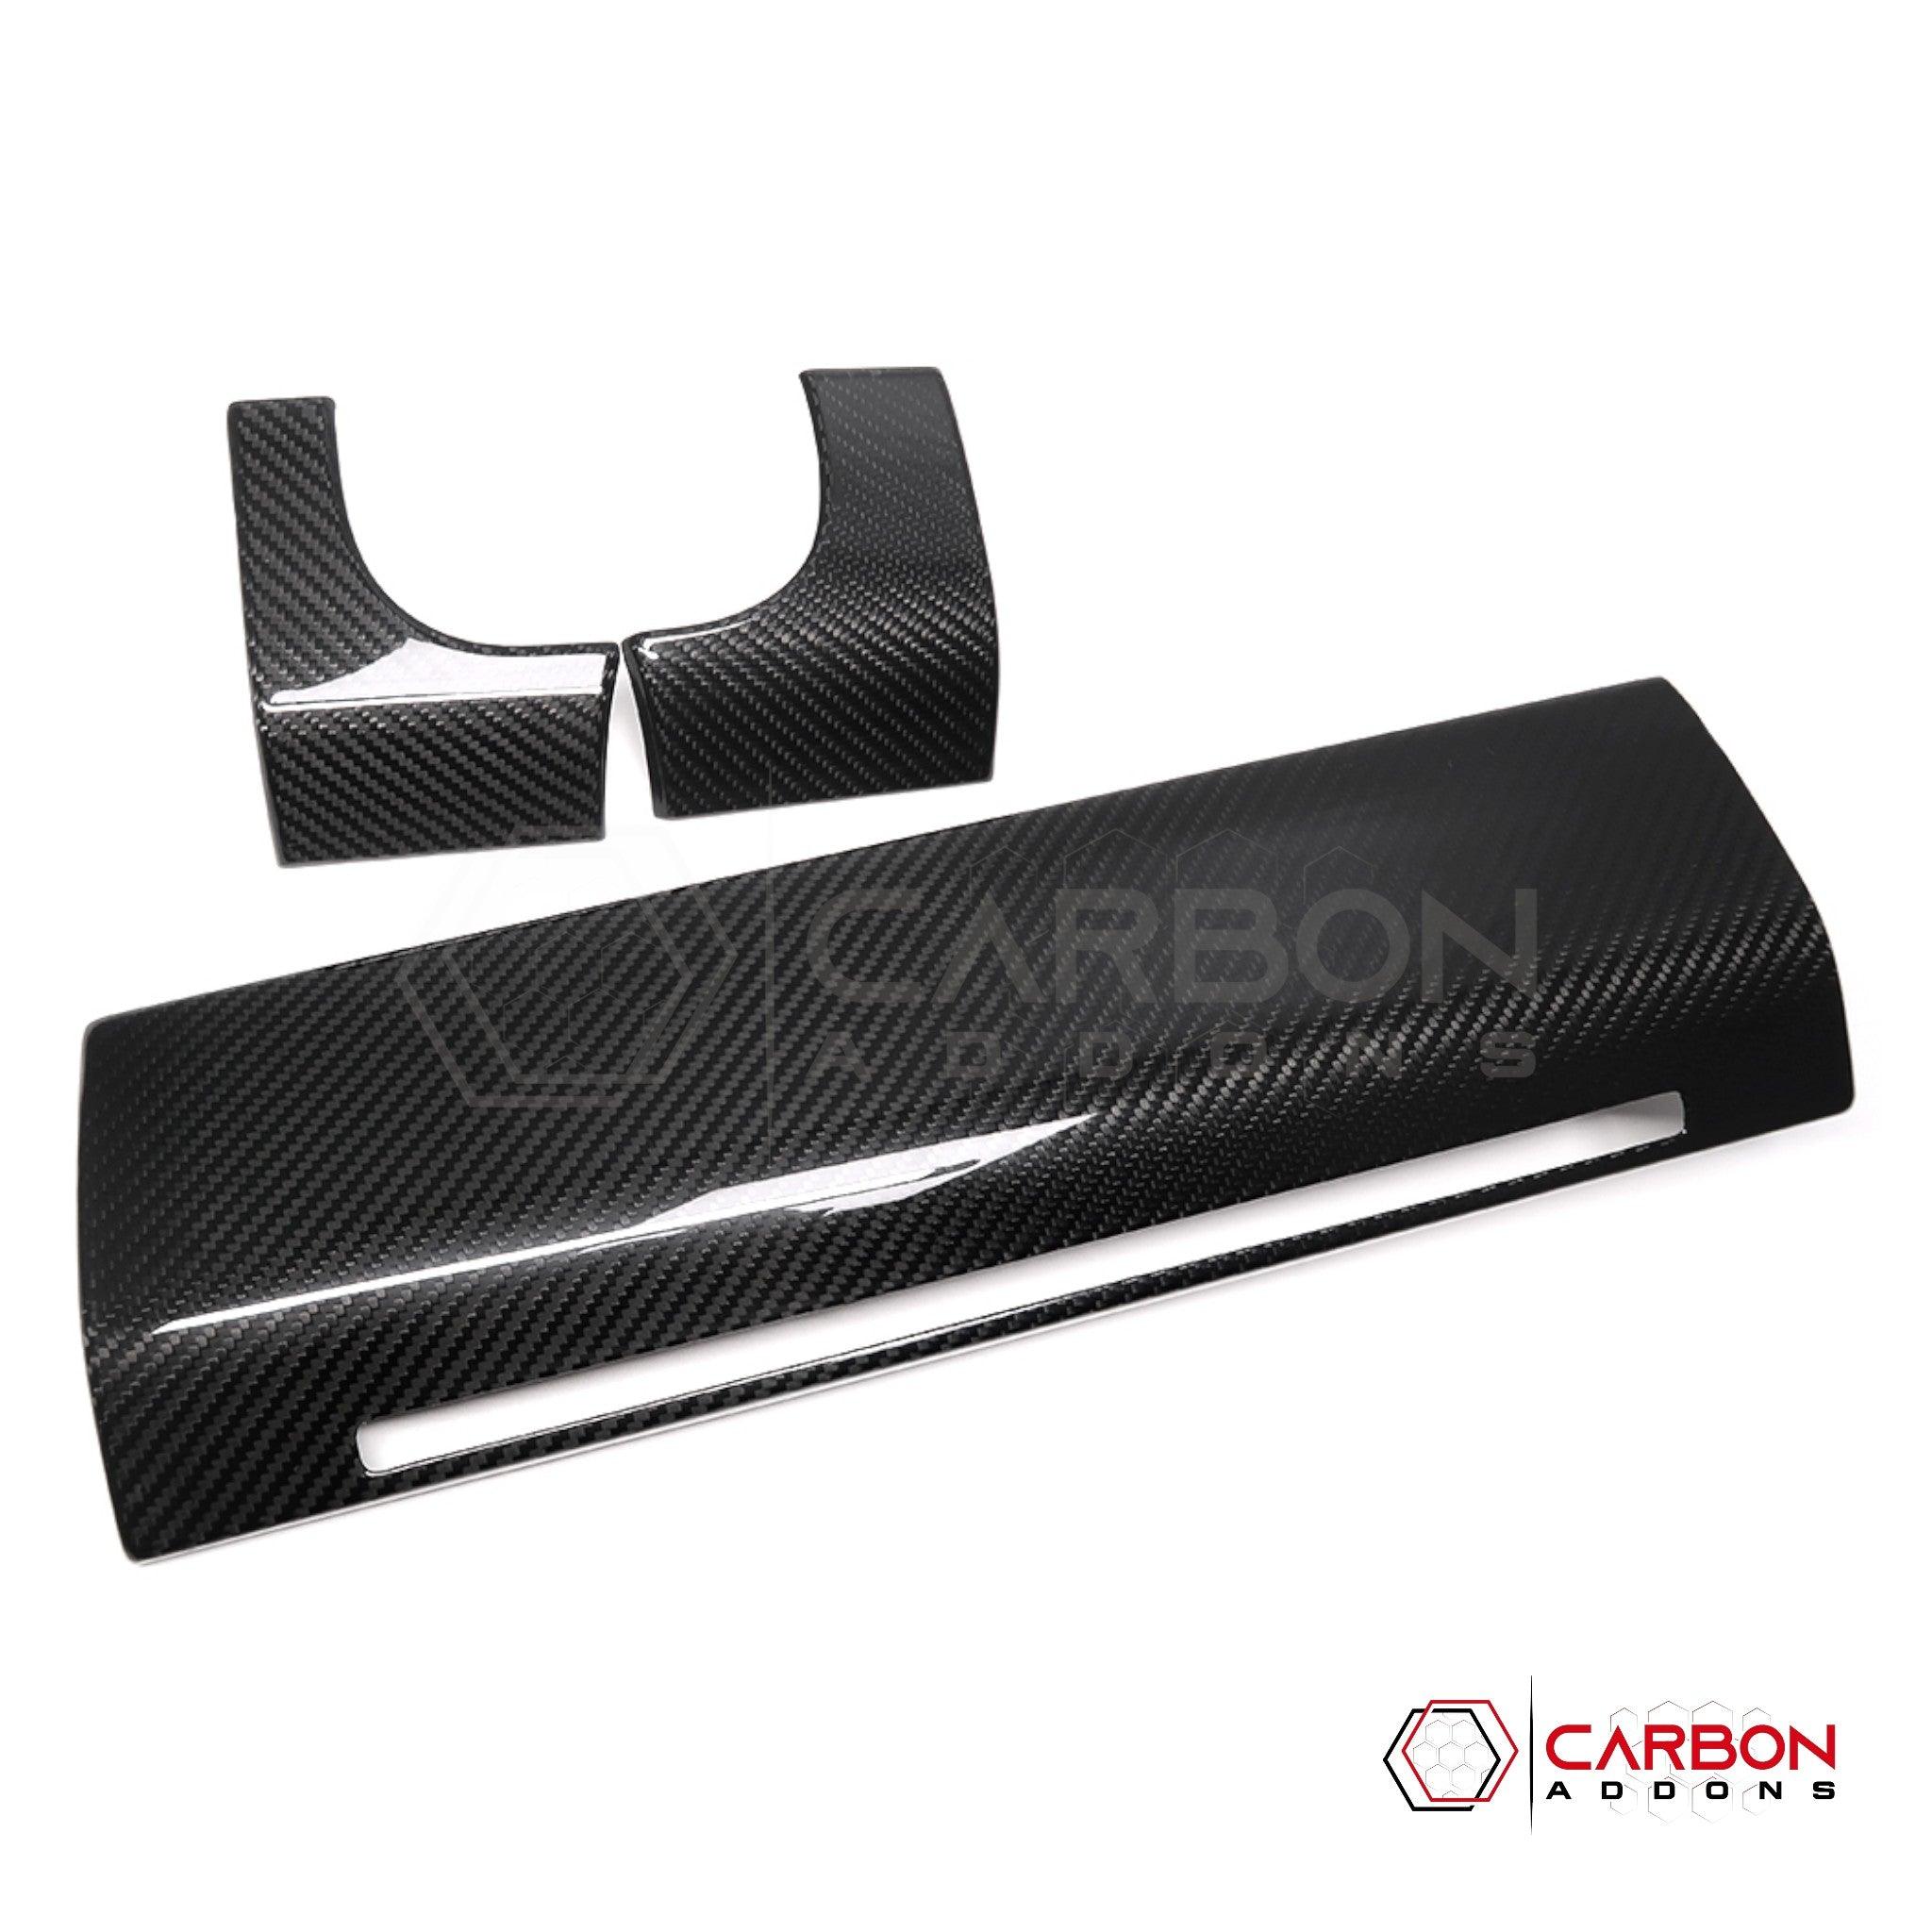 [Coming Soon] Ford F150 2021-Present Dashboard and Glove Box Hard Carbon Fiber Cover - carbonaddons Carbon Fiber Parts, Accessories, Upgrades, Mods